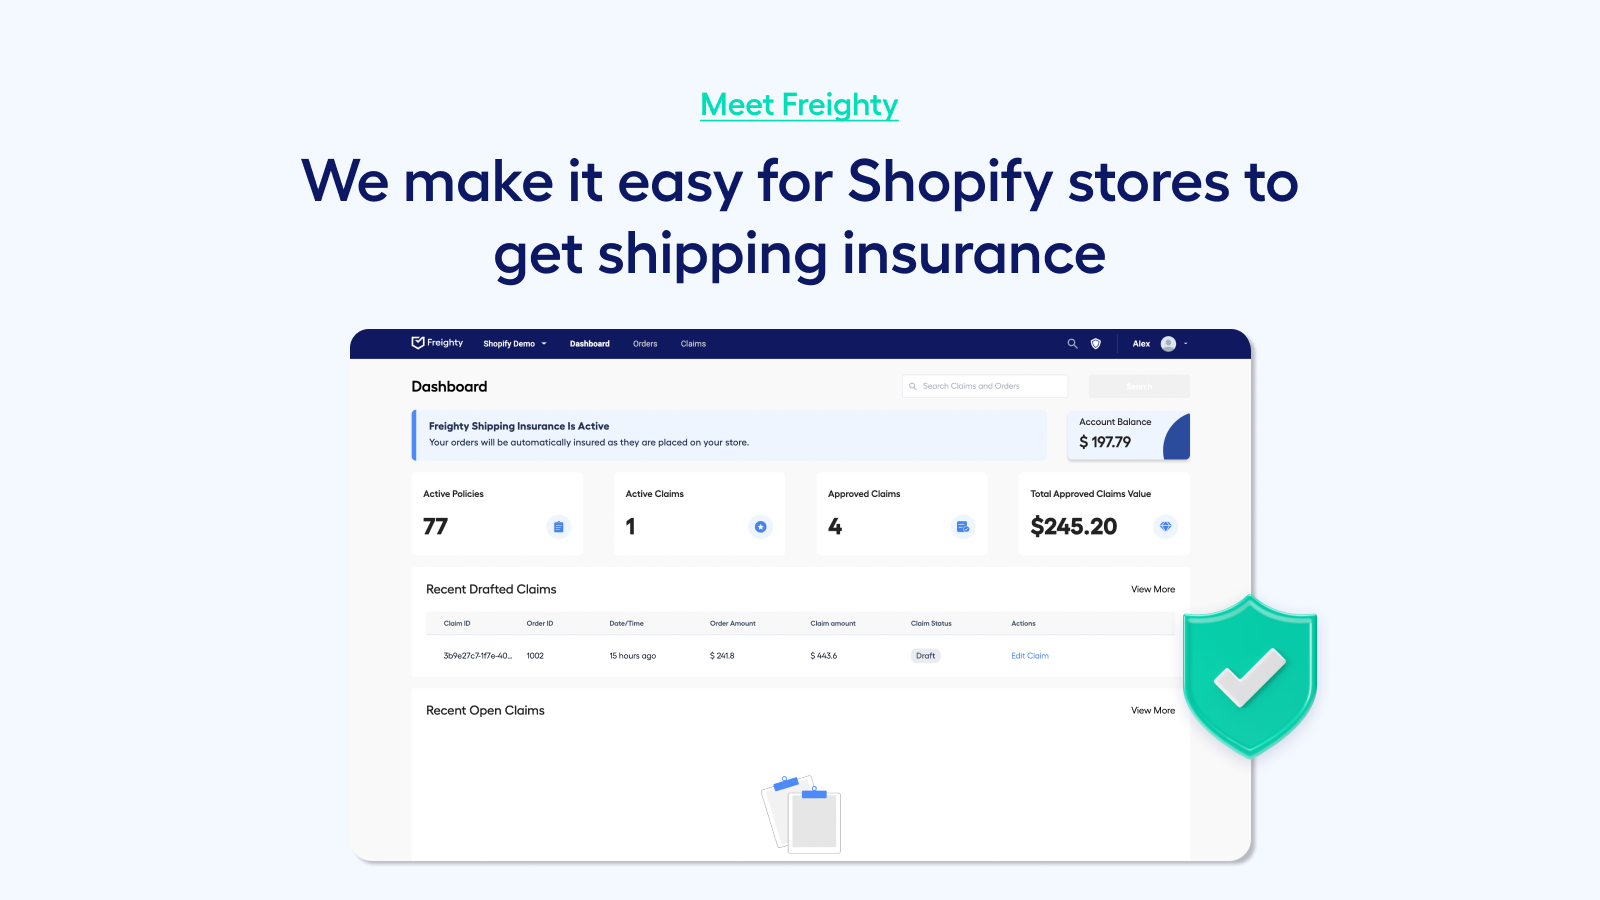 Freighty makes it easy for Shopify Stores to get insurance